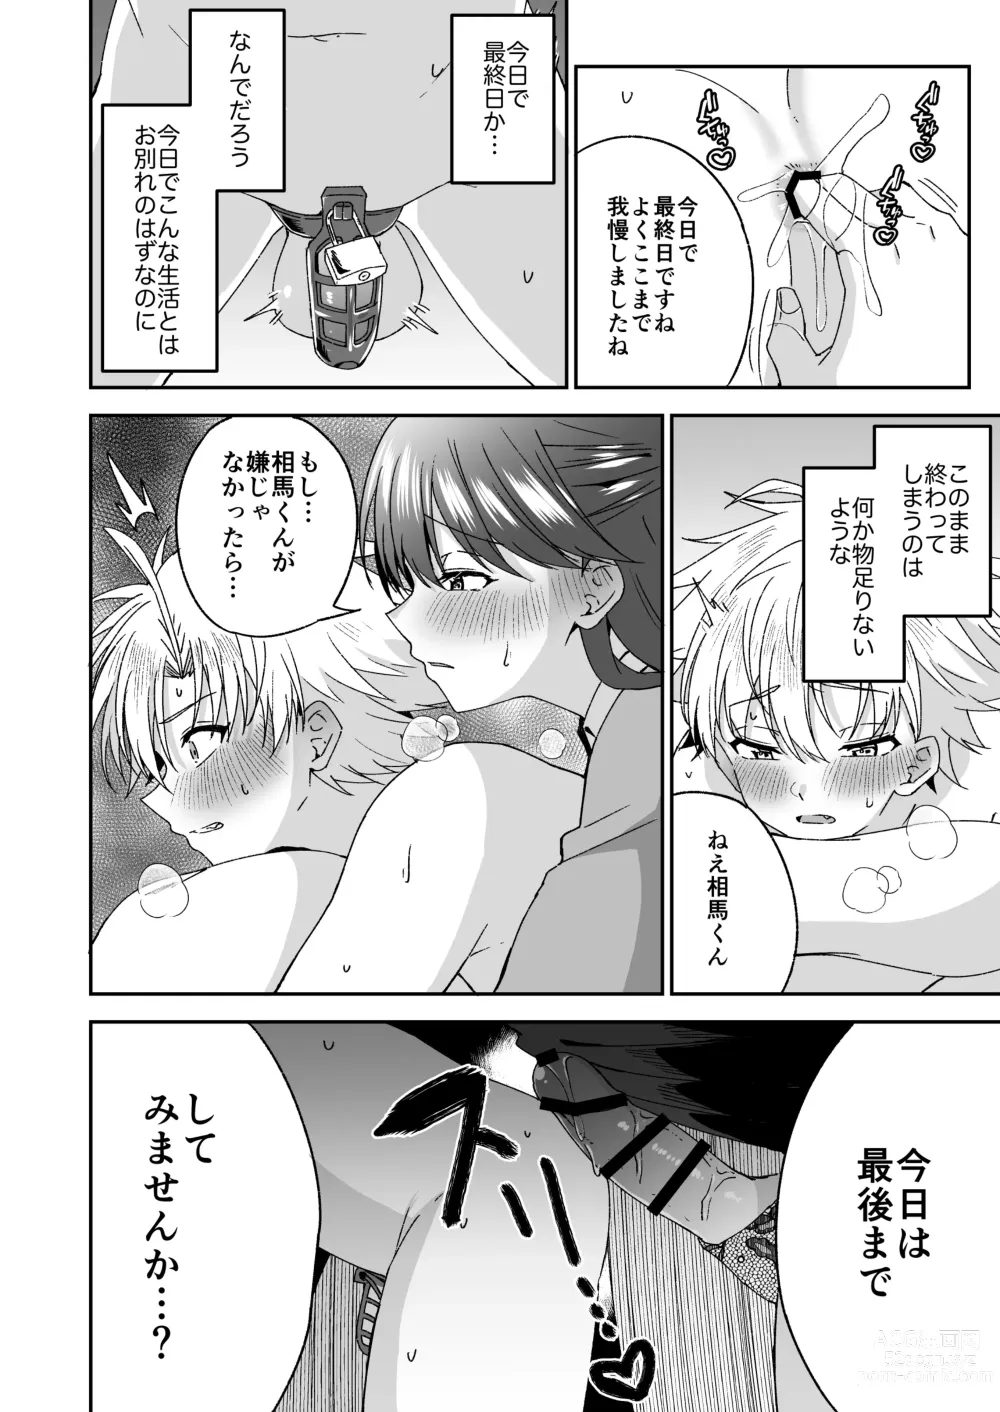 Page 33 of doujinshi A story about a delinquent boy who gets chastity belt ejaculation control reverse anal sex by a female teacher who is a nymphomaniac